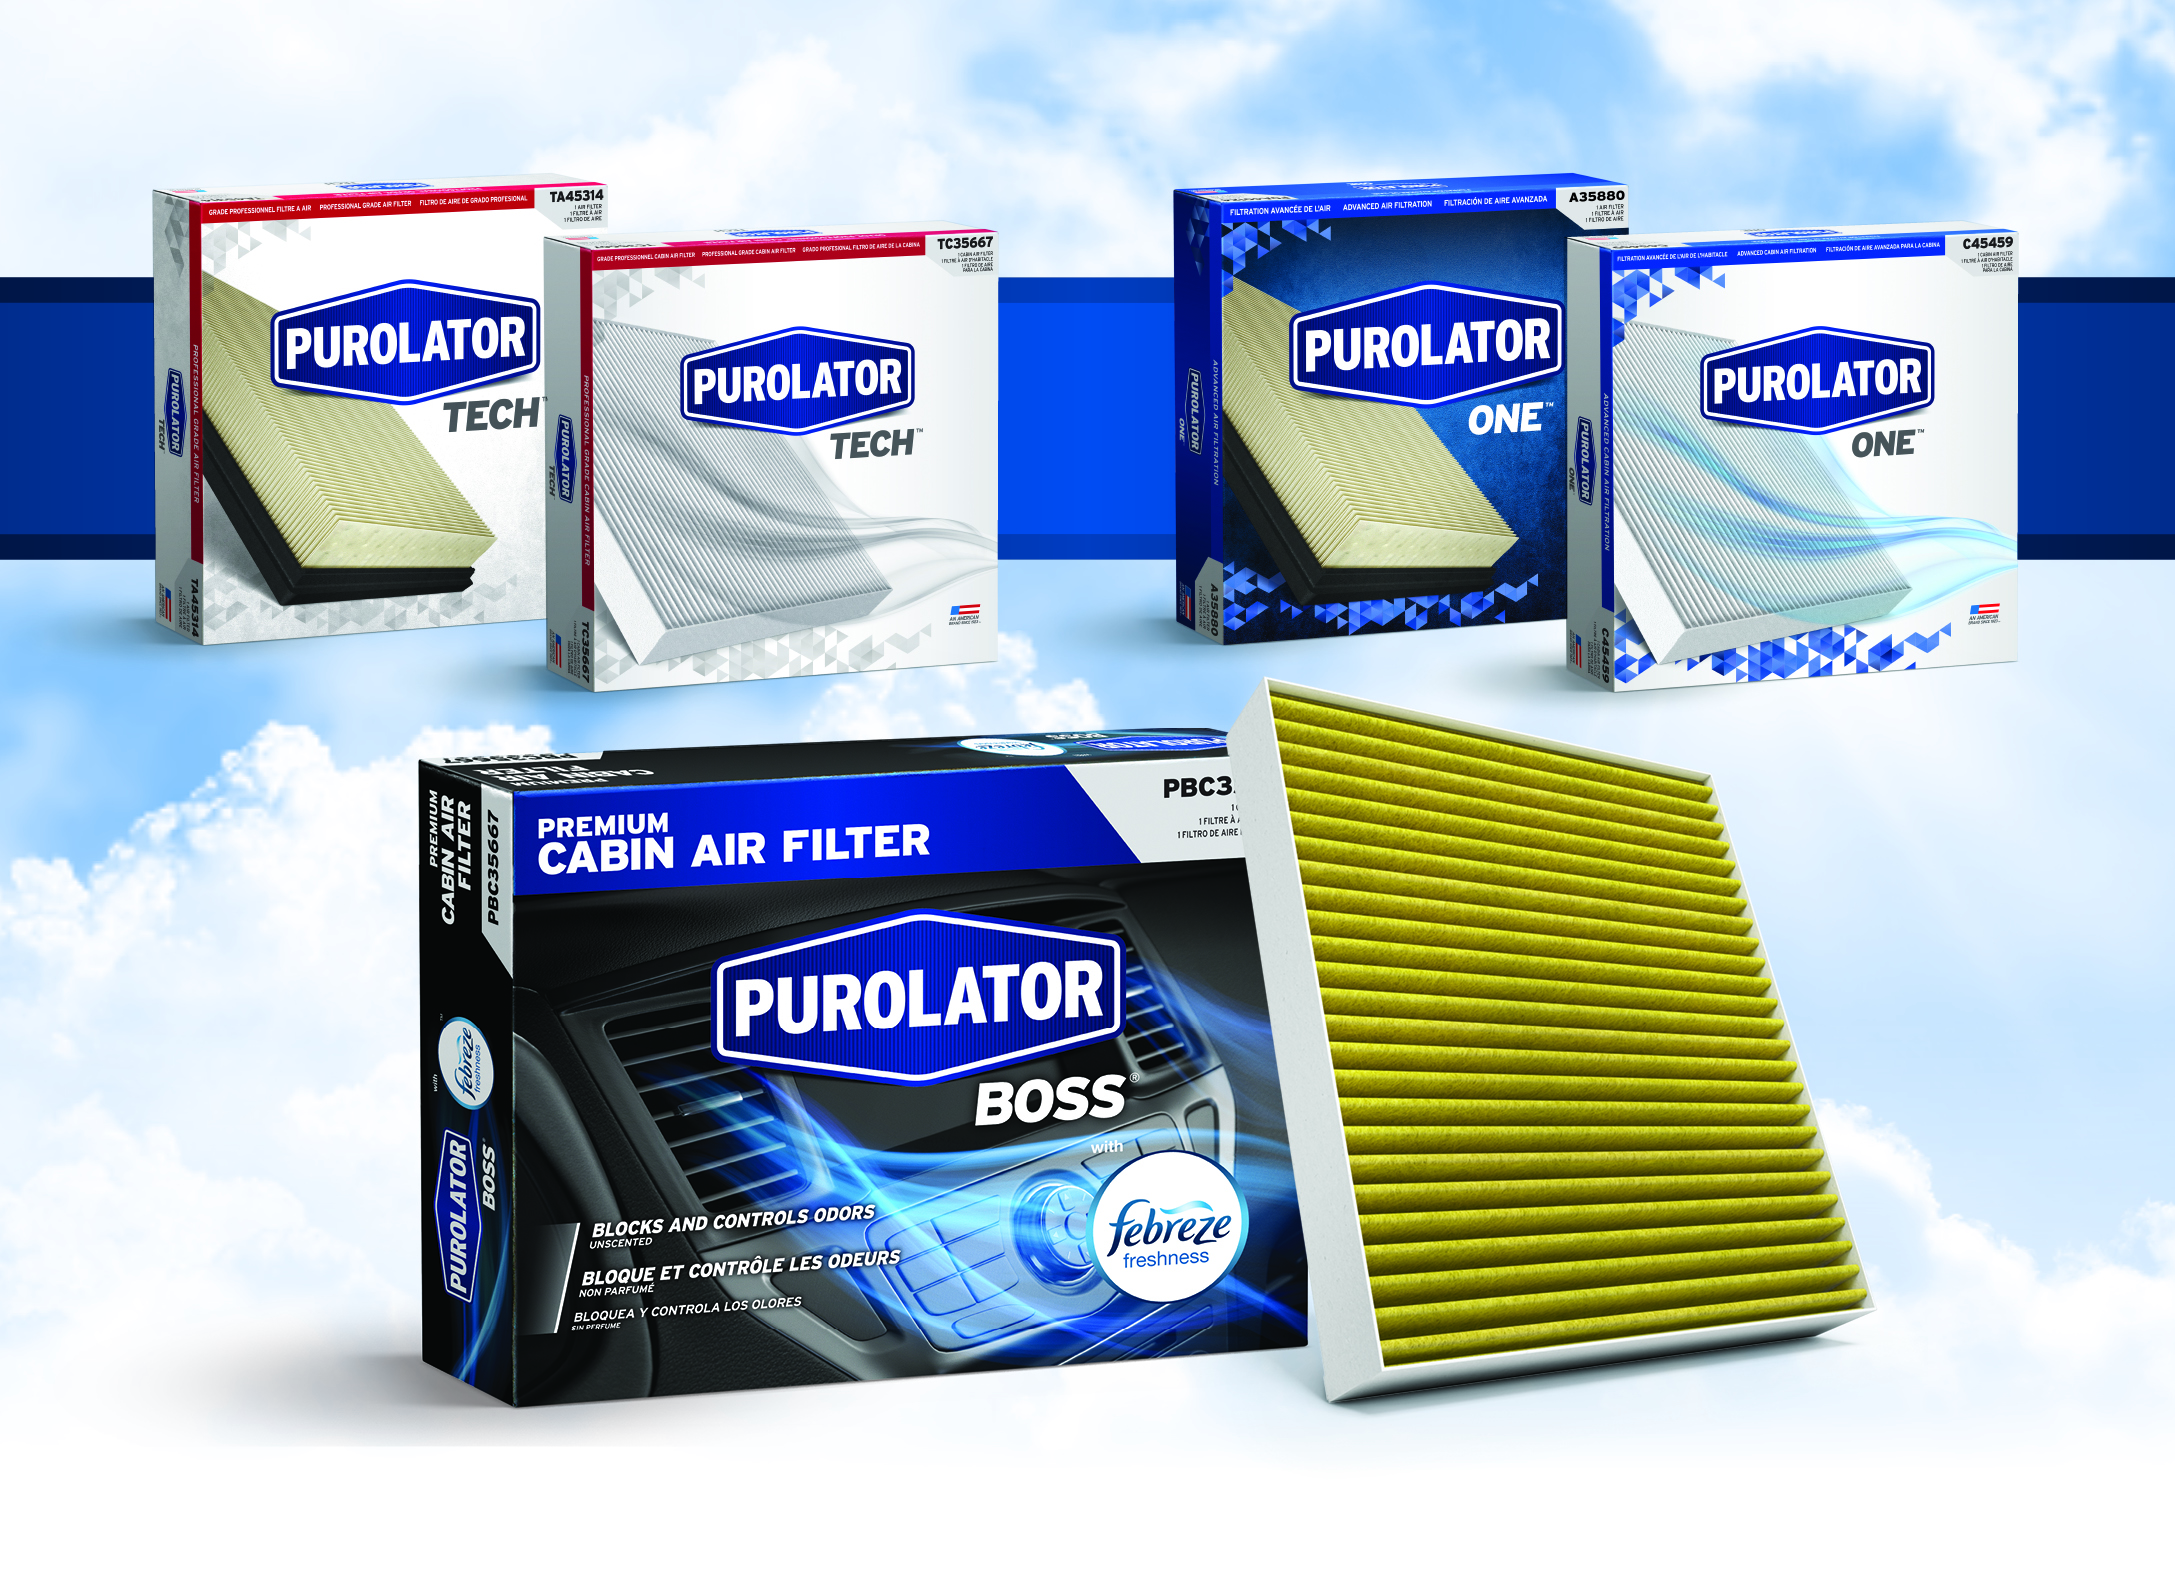 national-promotion-from-purolator-encourages-drivers-to-replace-air-and